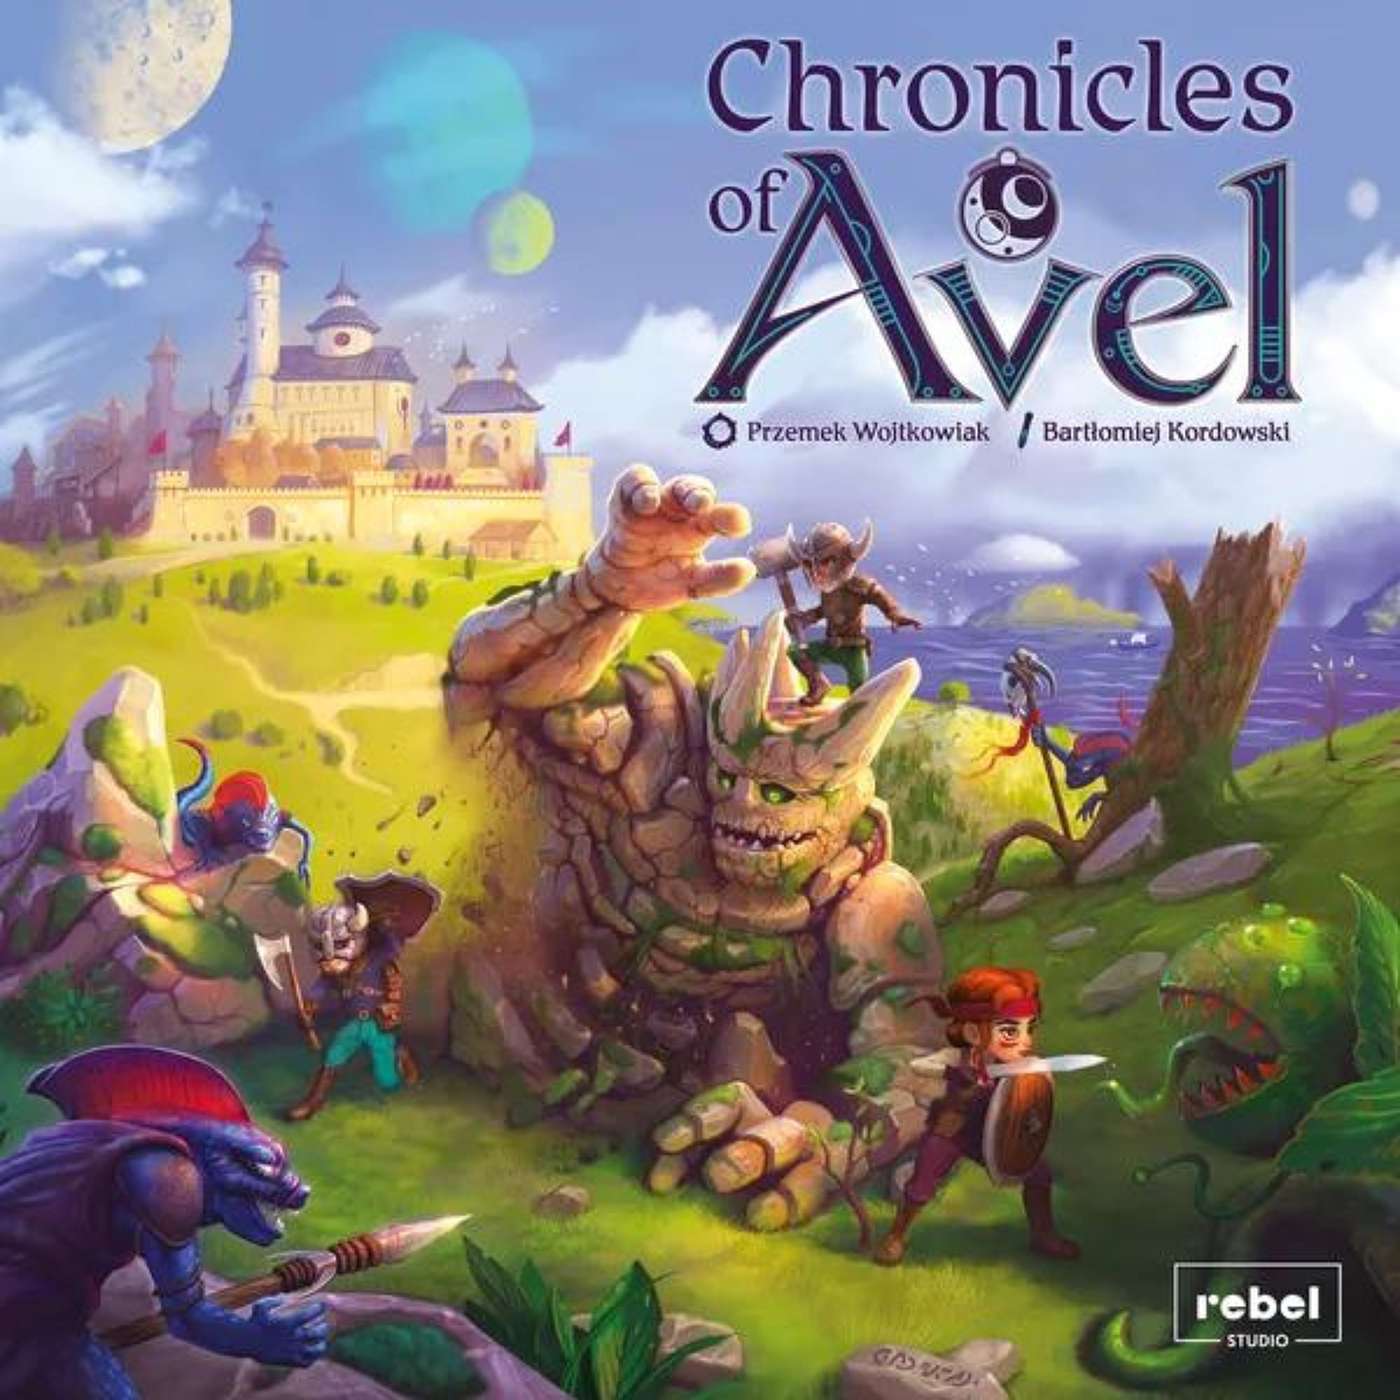 Chronicles of Avel – A Kid’s Table Review